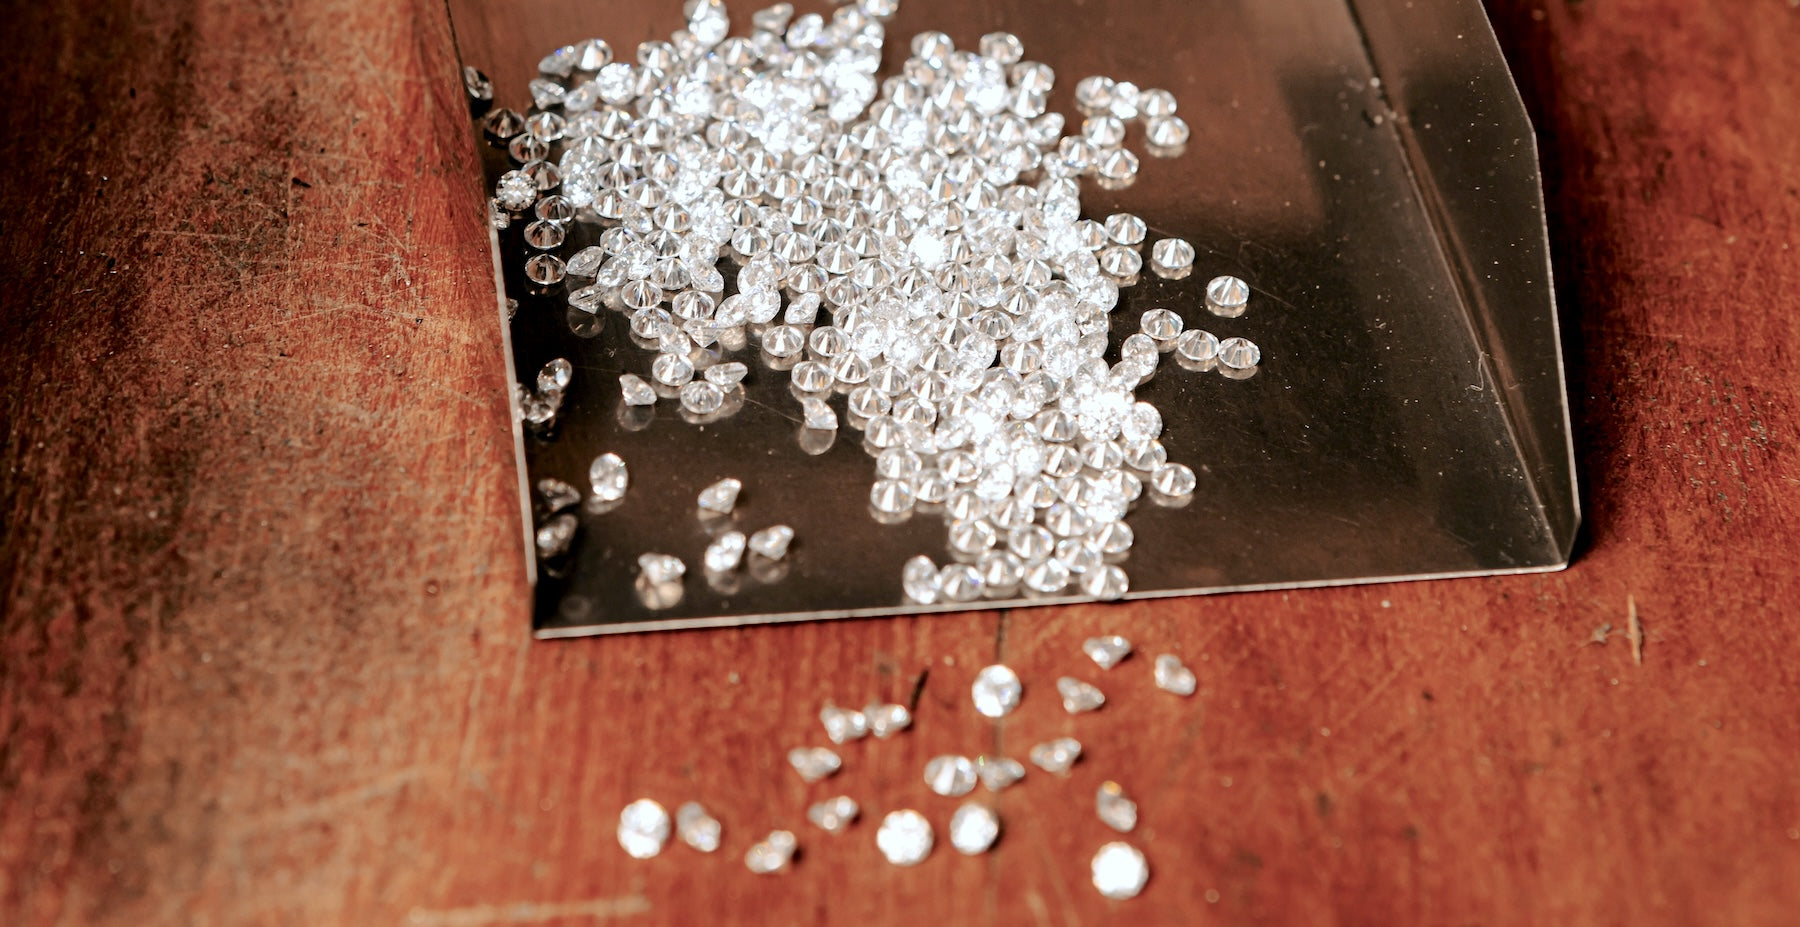 A stock image of a wooden table top. Upon it, there is a metal tray that contains a pile of tiny faceted diamonds, which spill out onto the table.